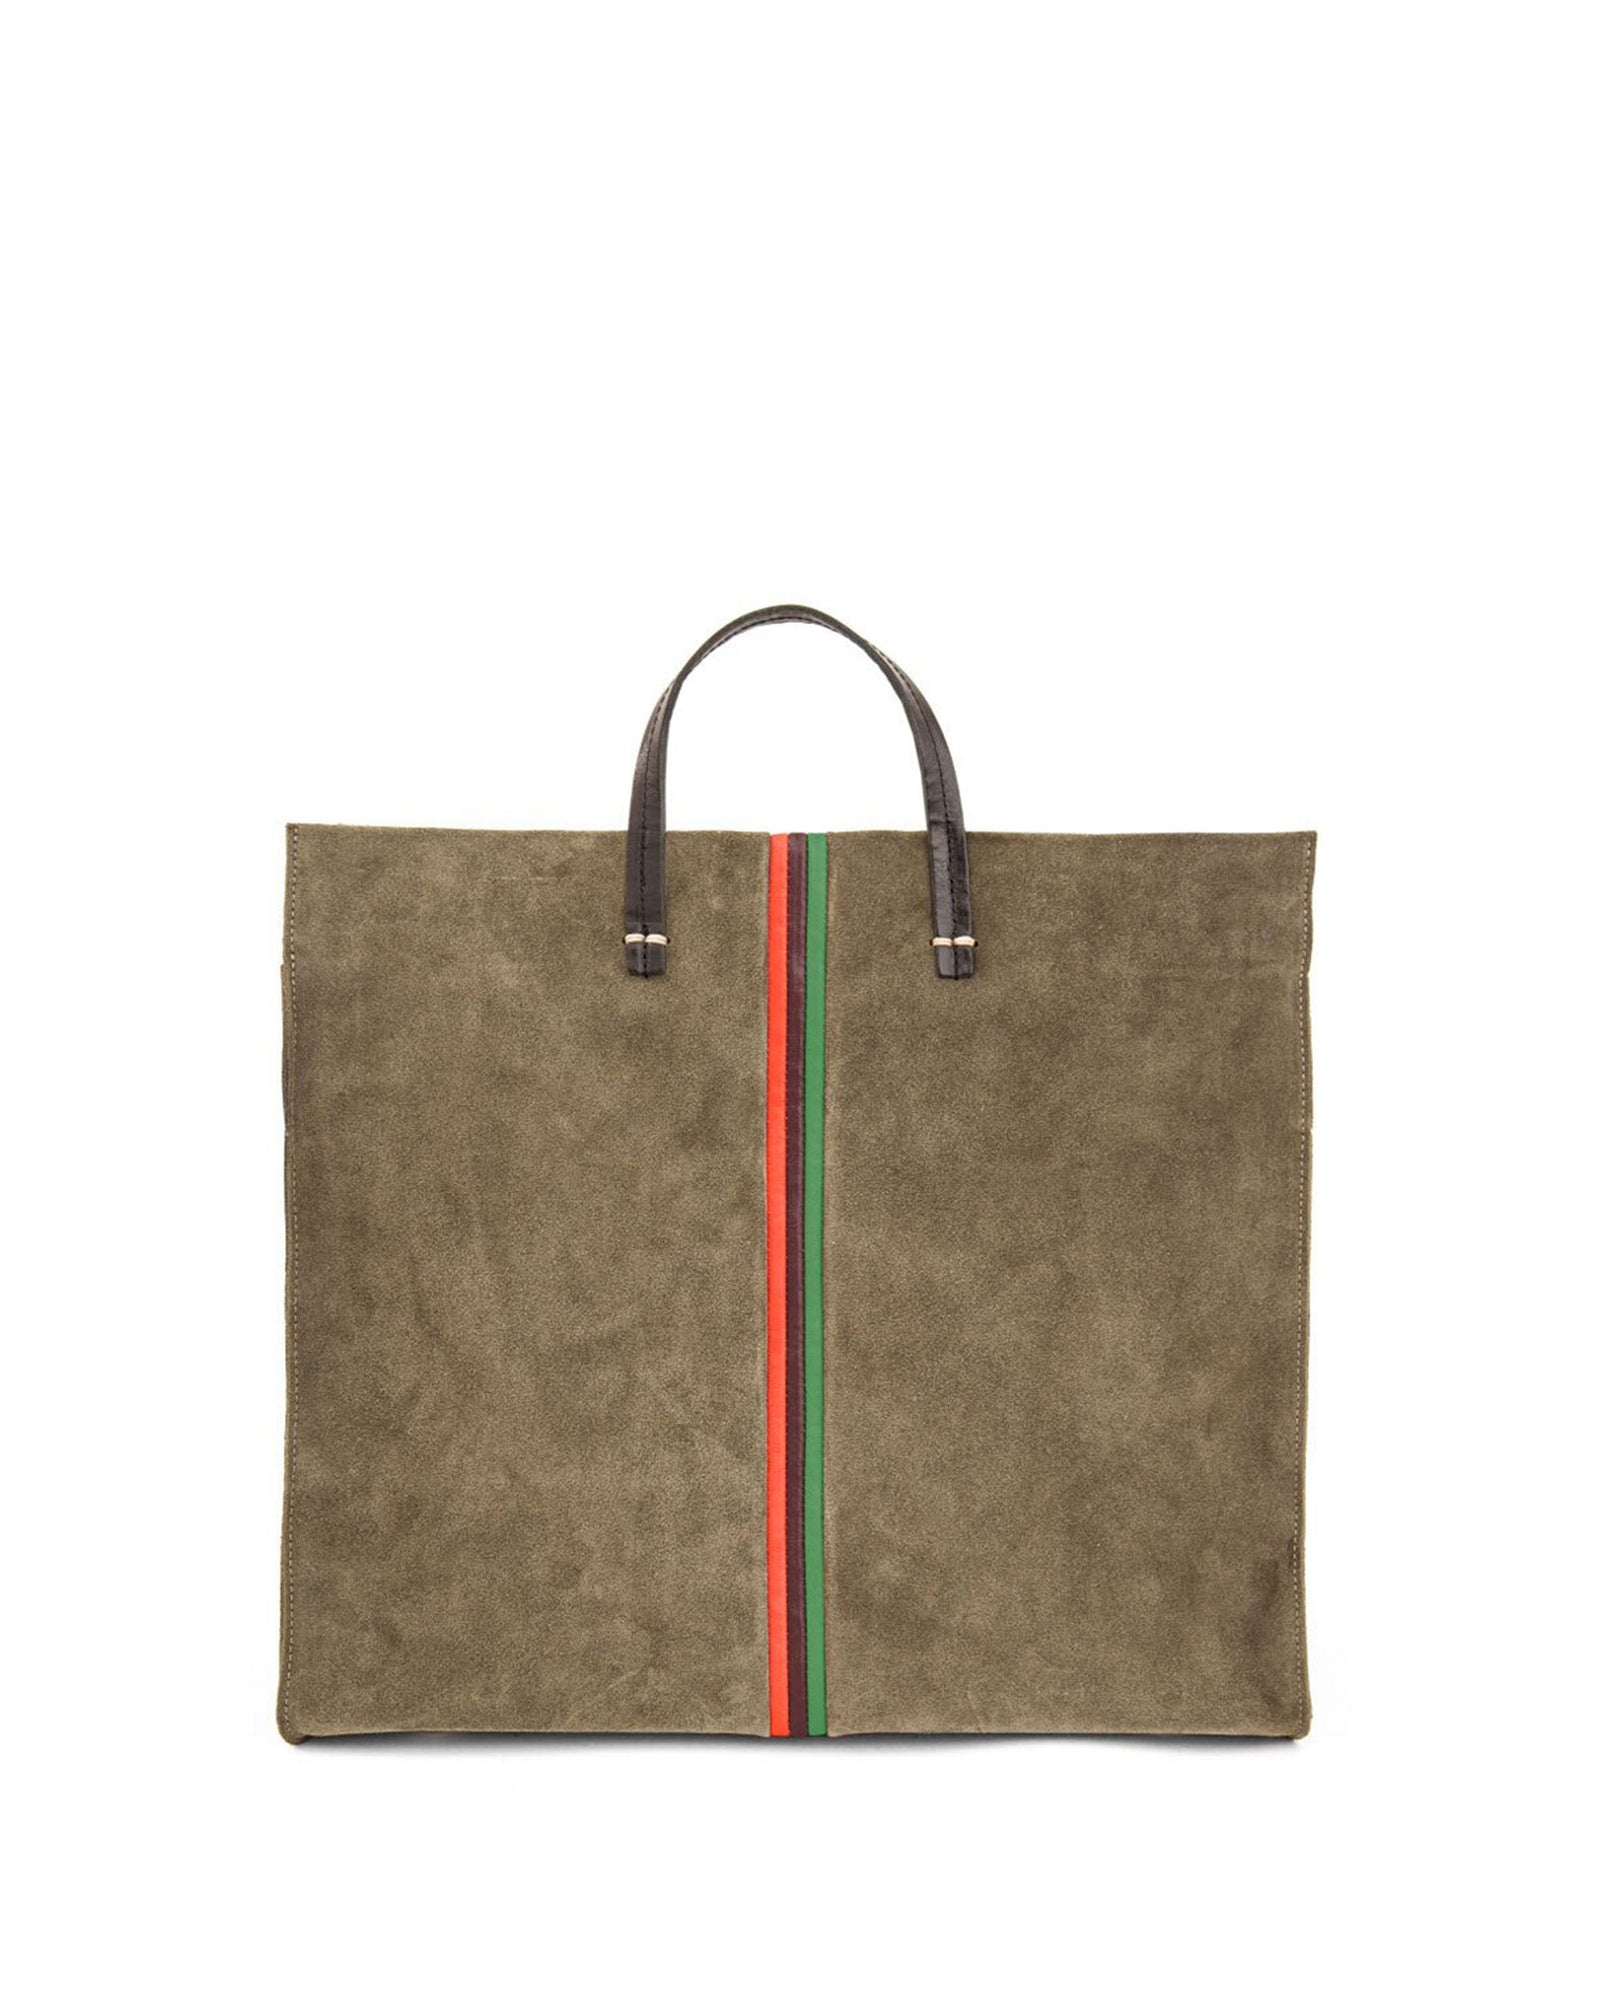 Army Suede with Lipsitck, Plum, and Fern Mini Stripes Simple Tote - Front